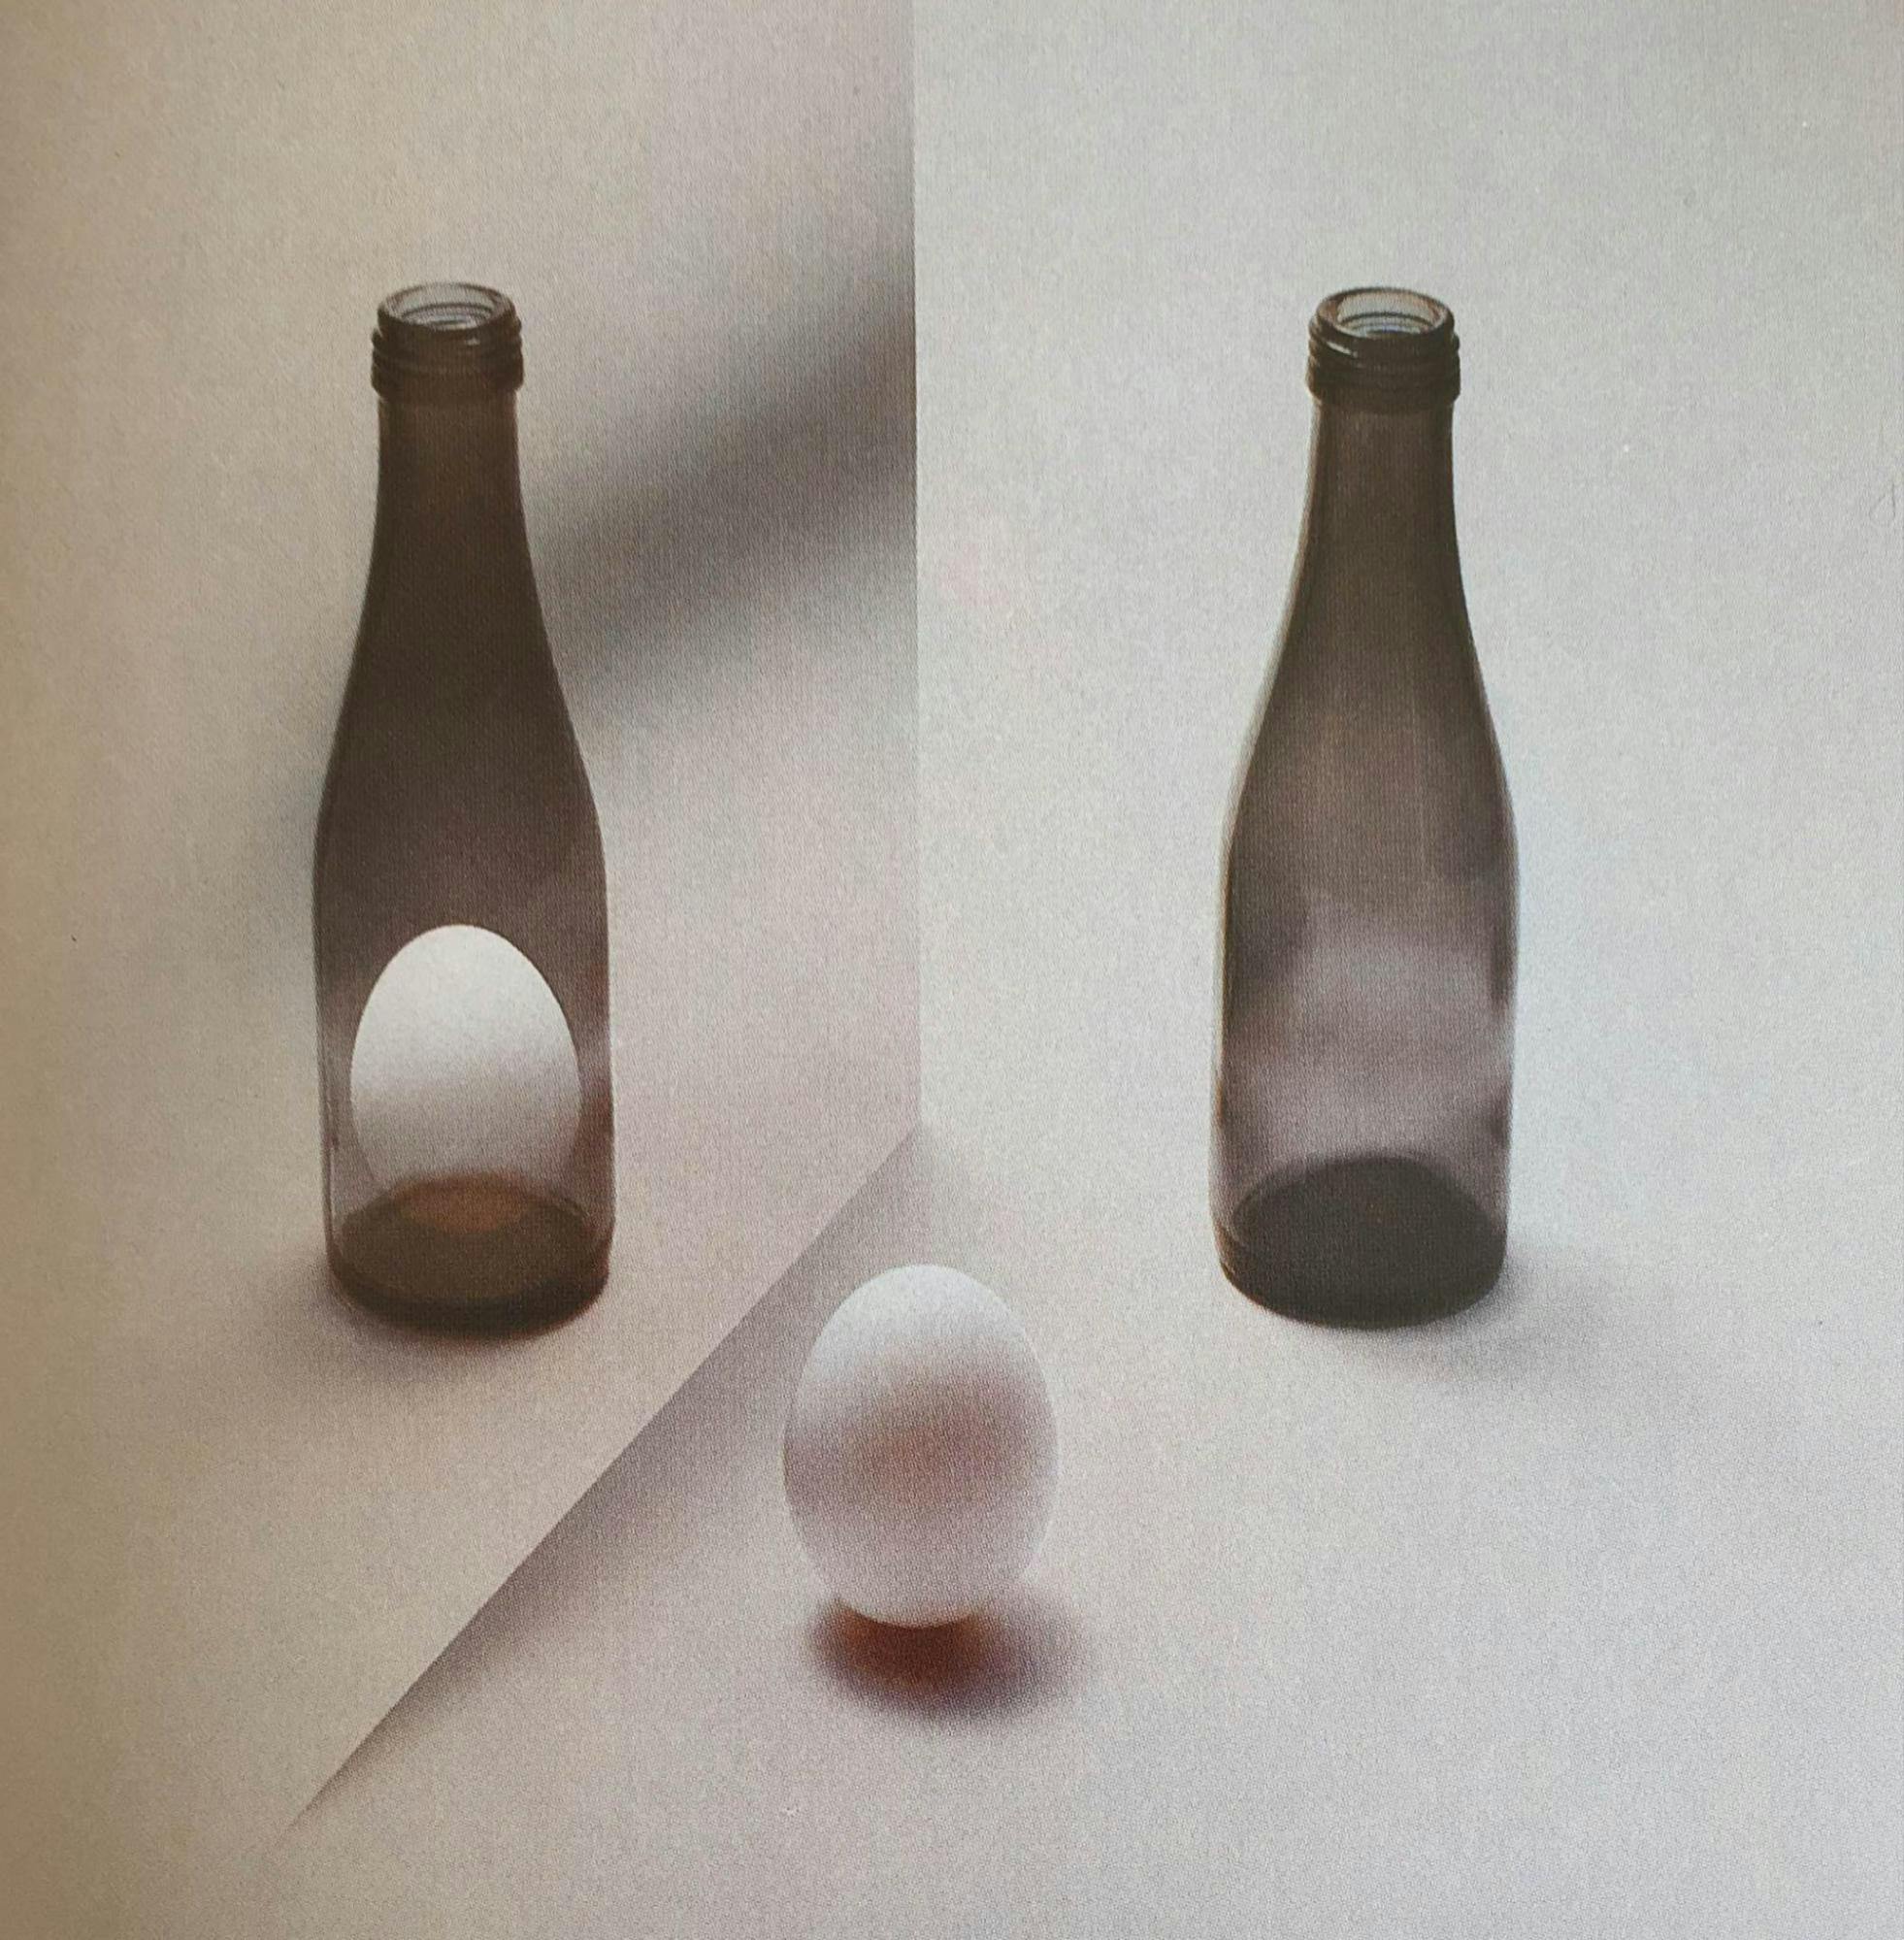 Susumu Endo, 1982. [A photograph of an egg in the foreground and two bottles in the background. One of the bottles has an egg inside of it.]